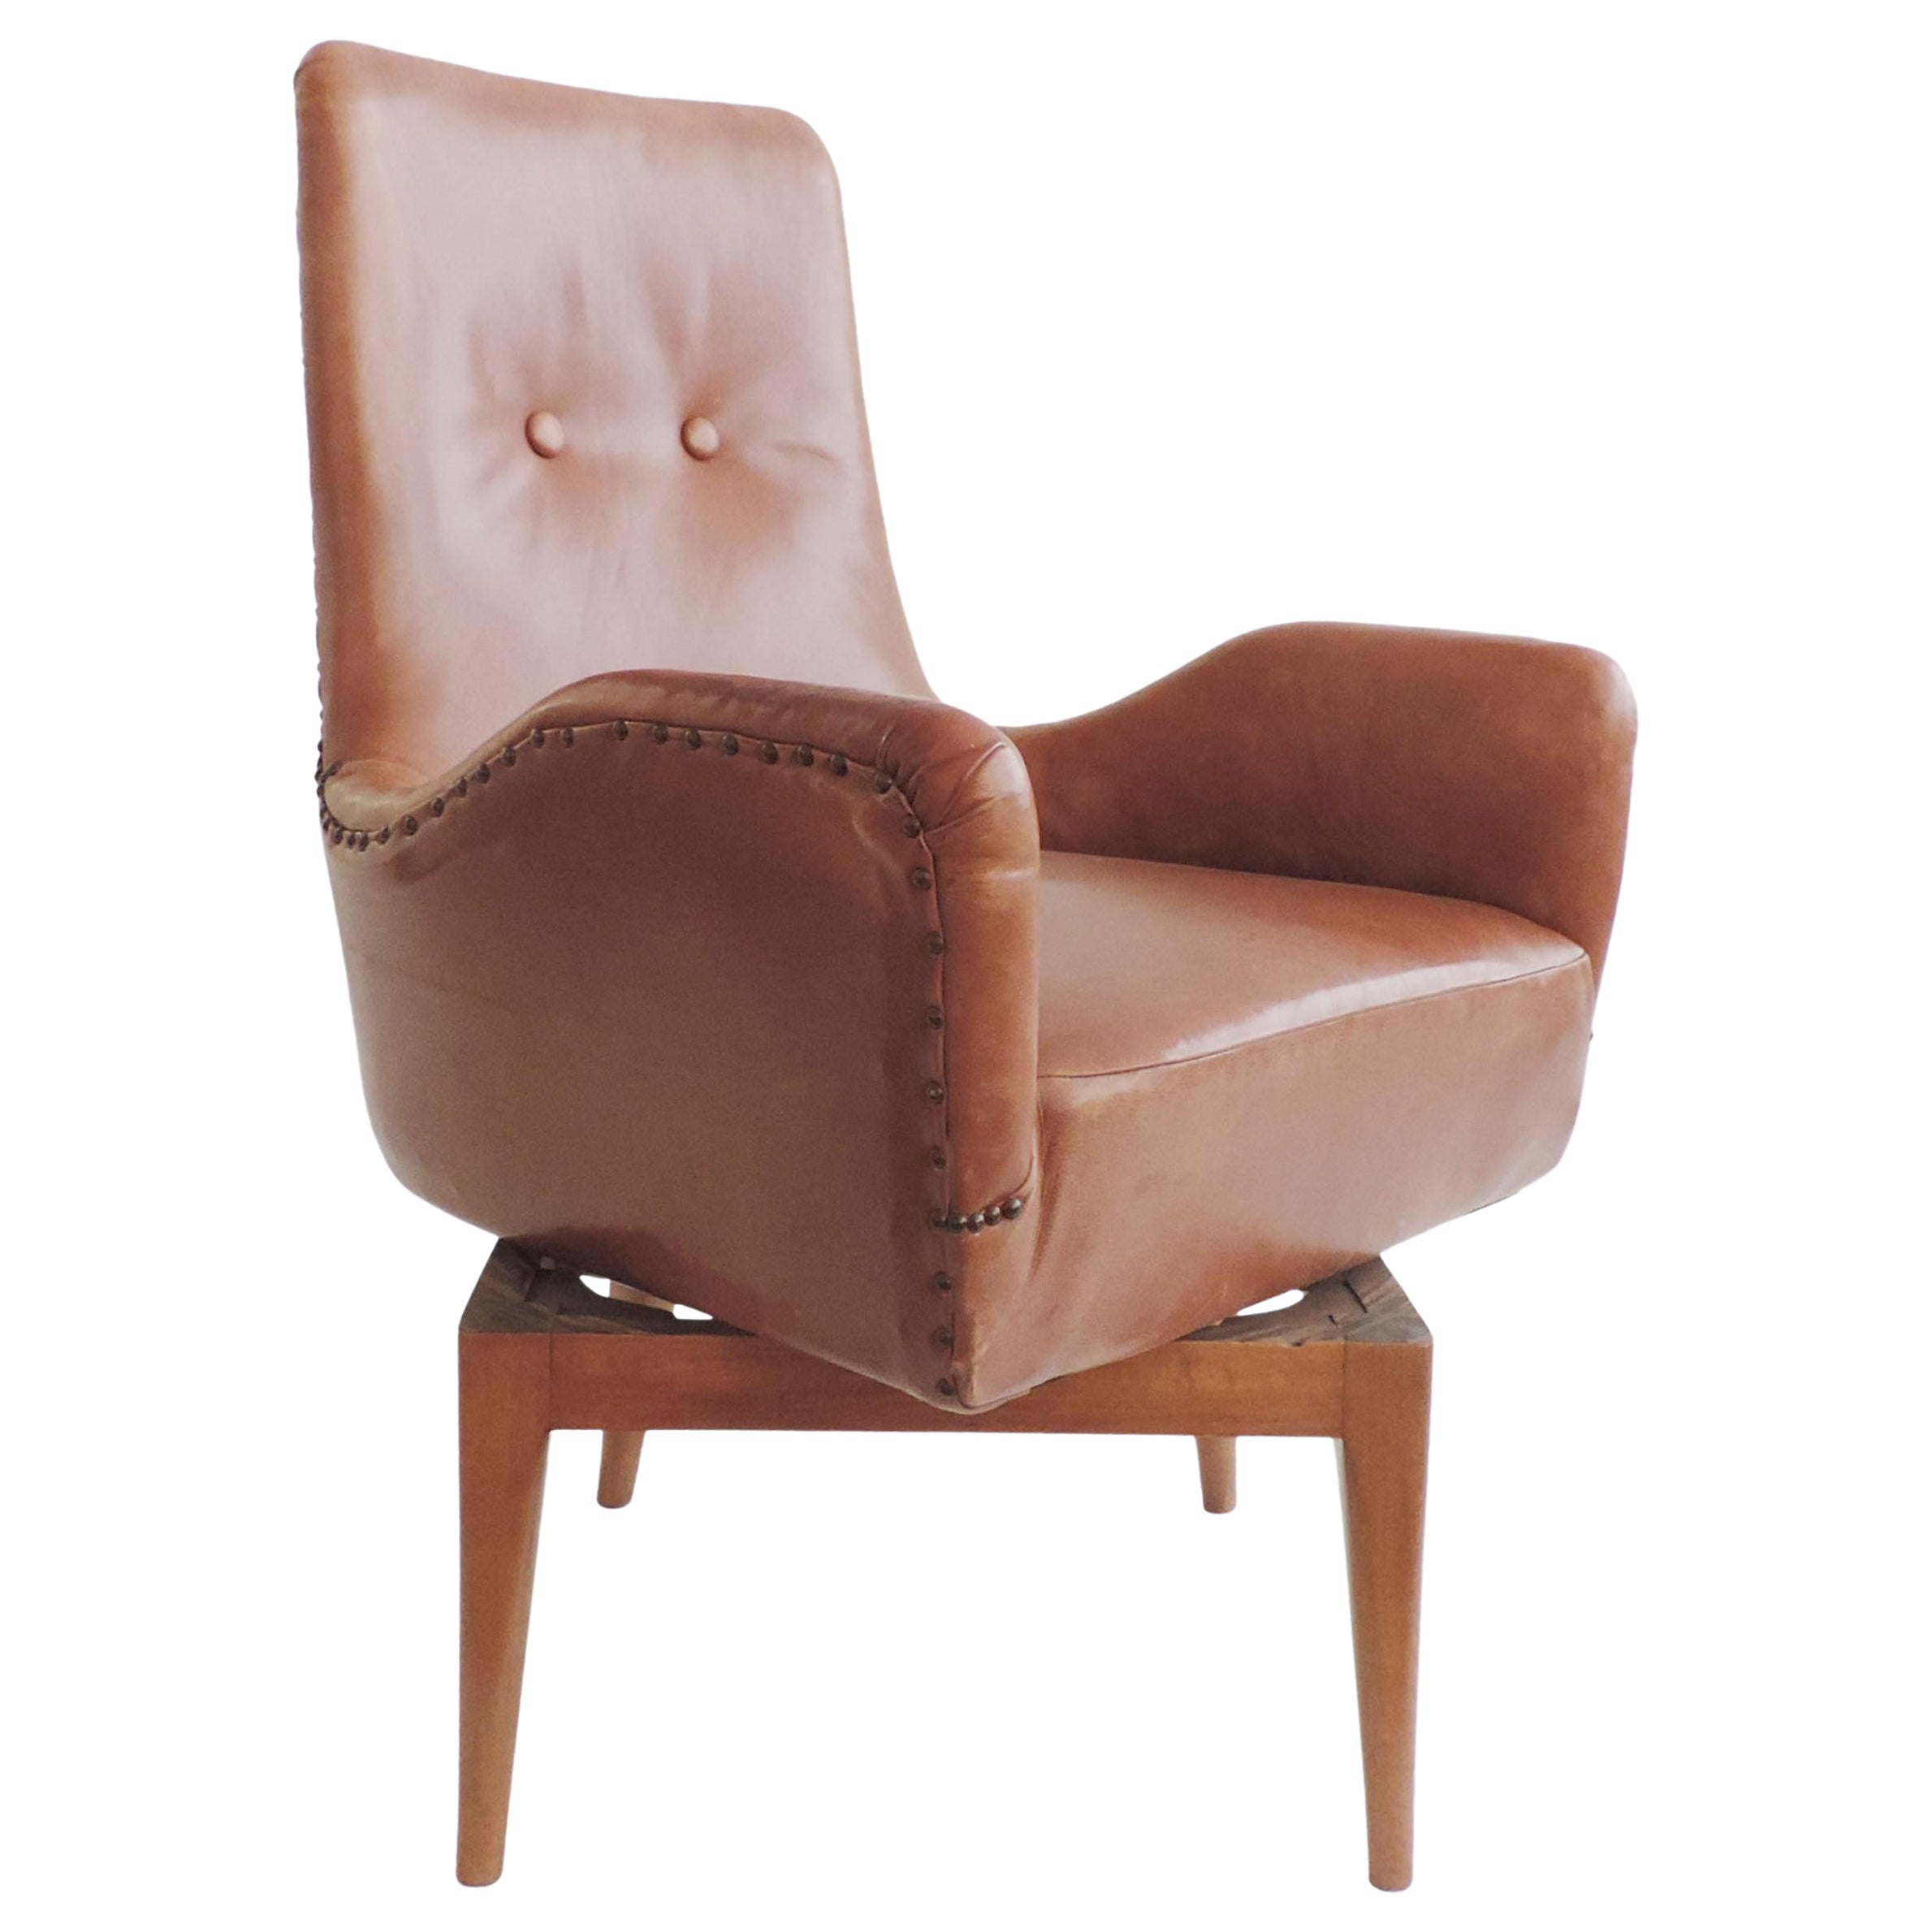 Giovanni Gariboldi Swivel Chair in Leather and Wood, Italy, 1940s